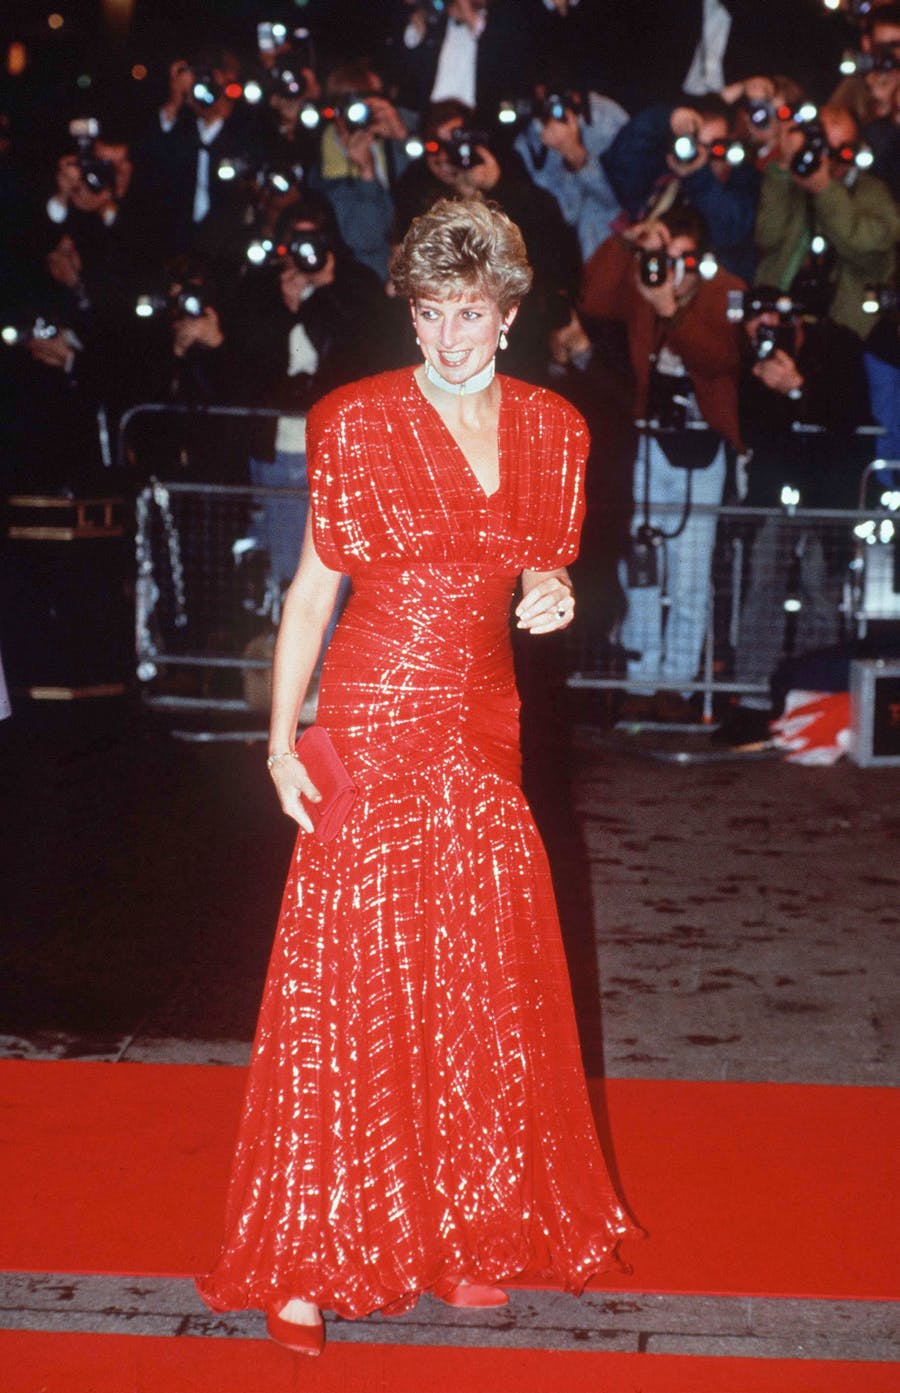 Princess Diana's Impossibly Festive '80s Dress Sold for $1.1